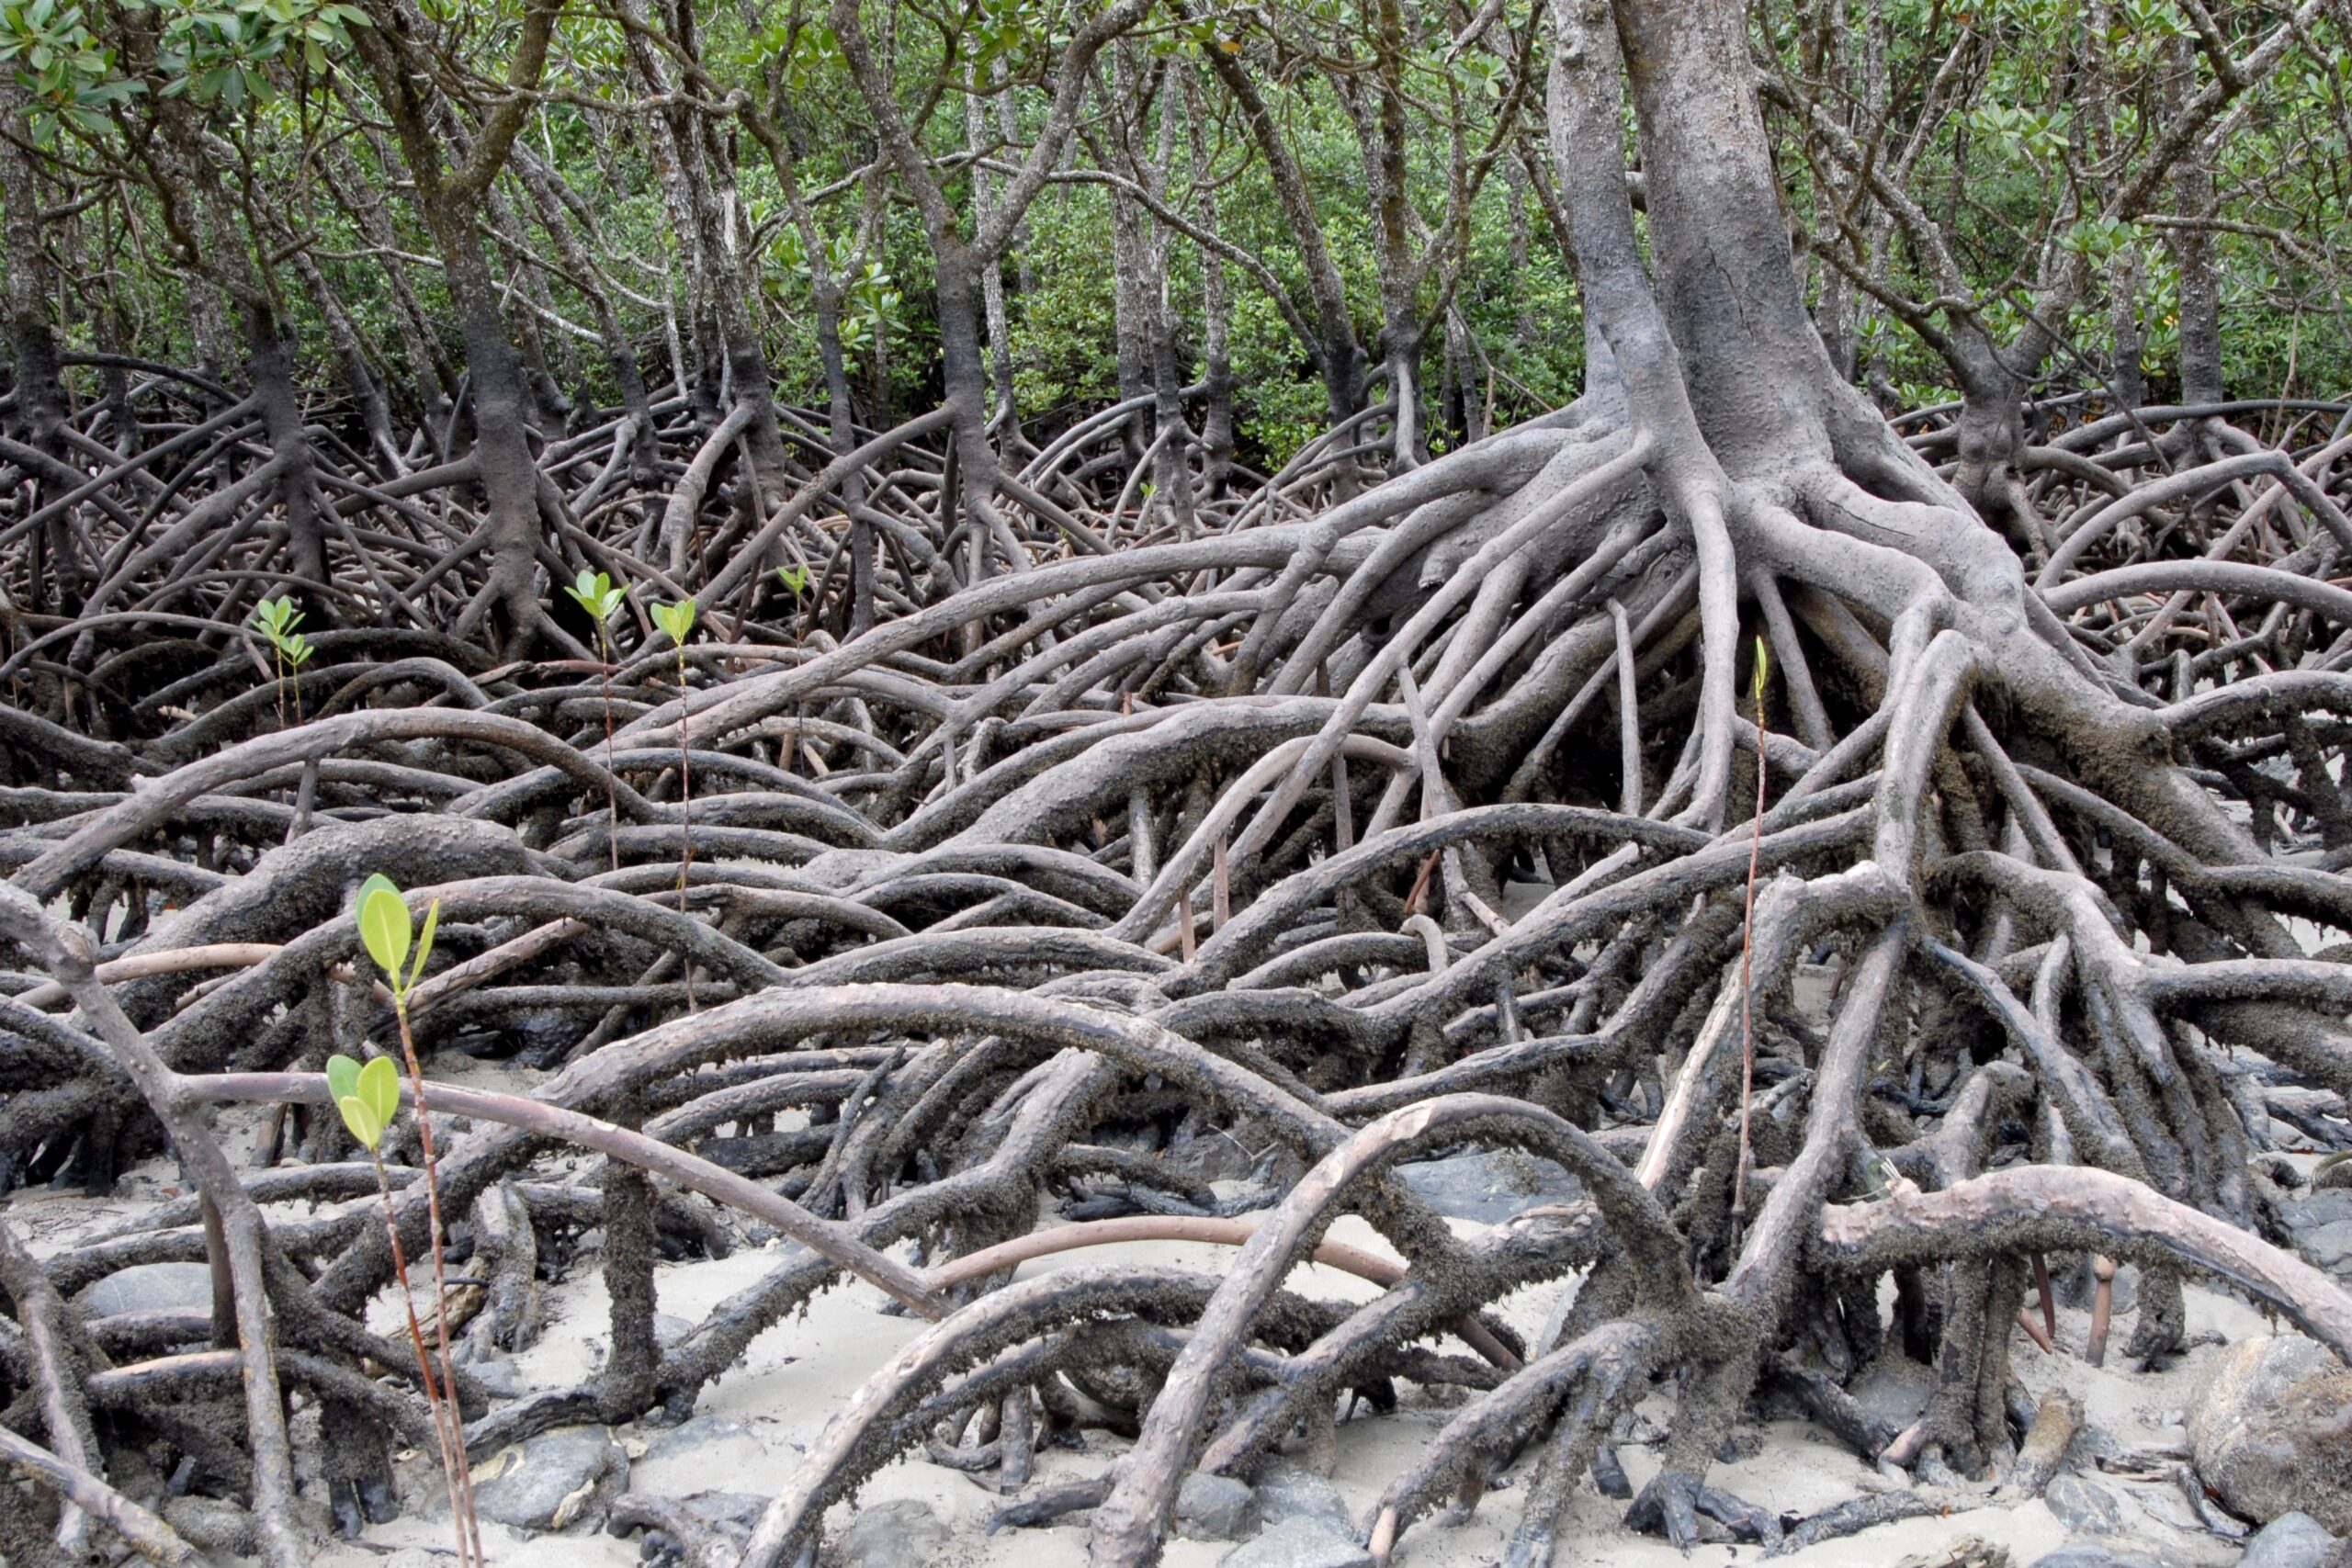 Indonesian science of institute uses MONMANG apps to monitor mangroves